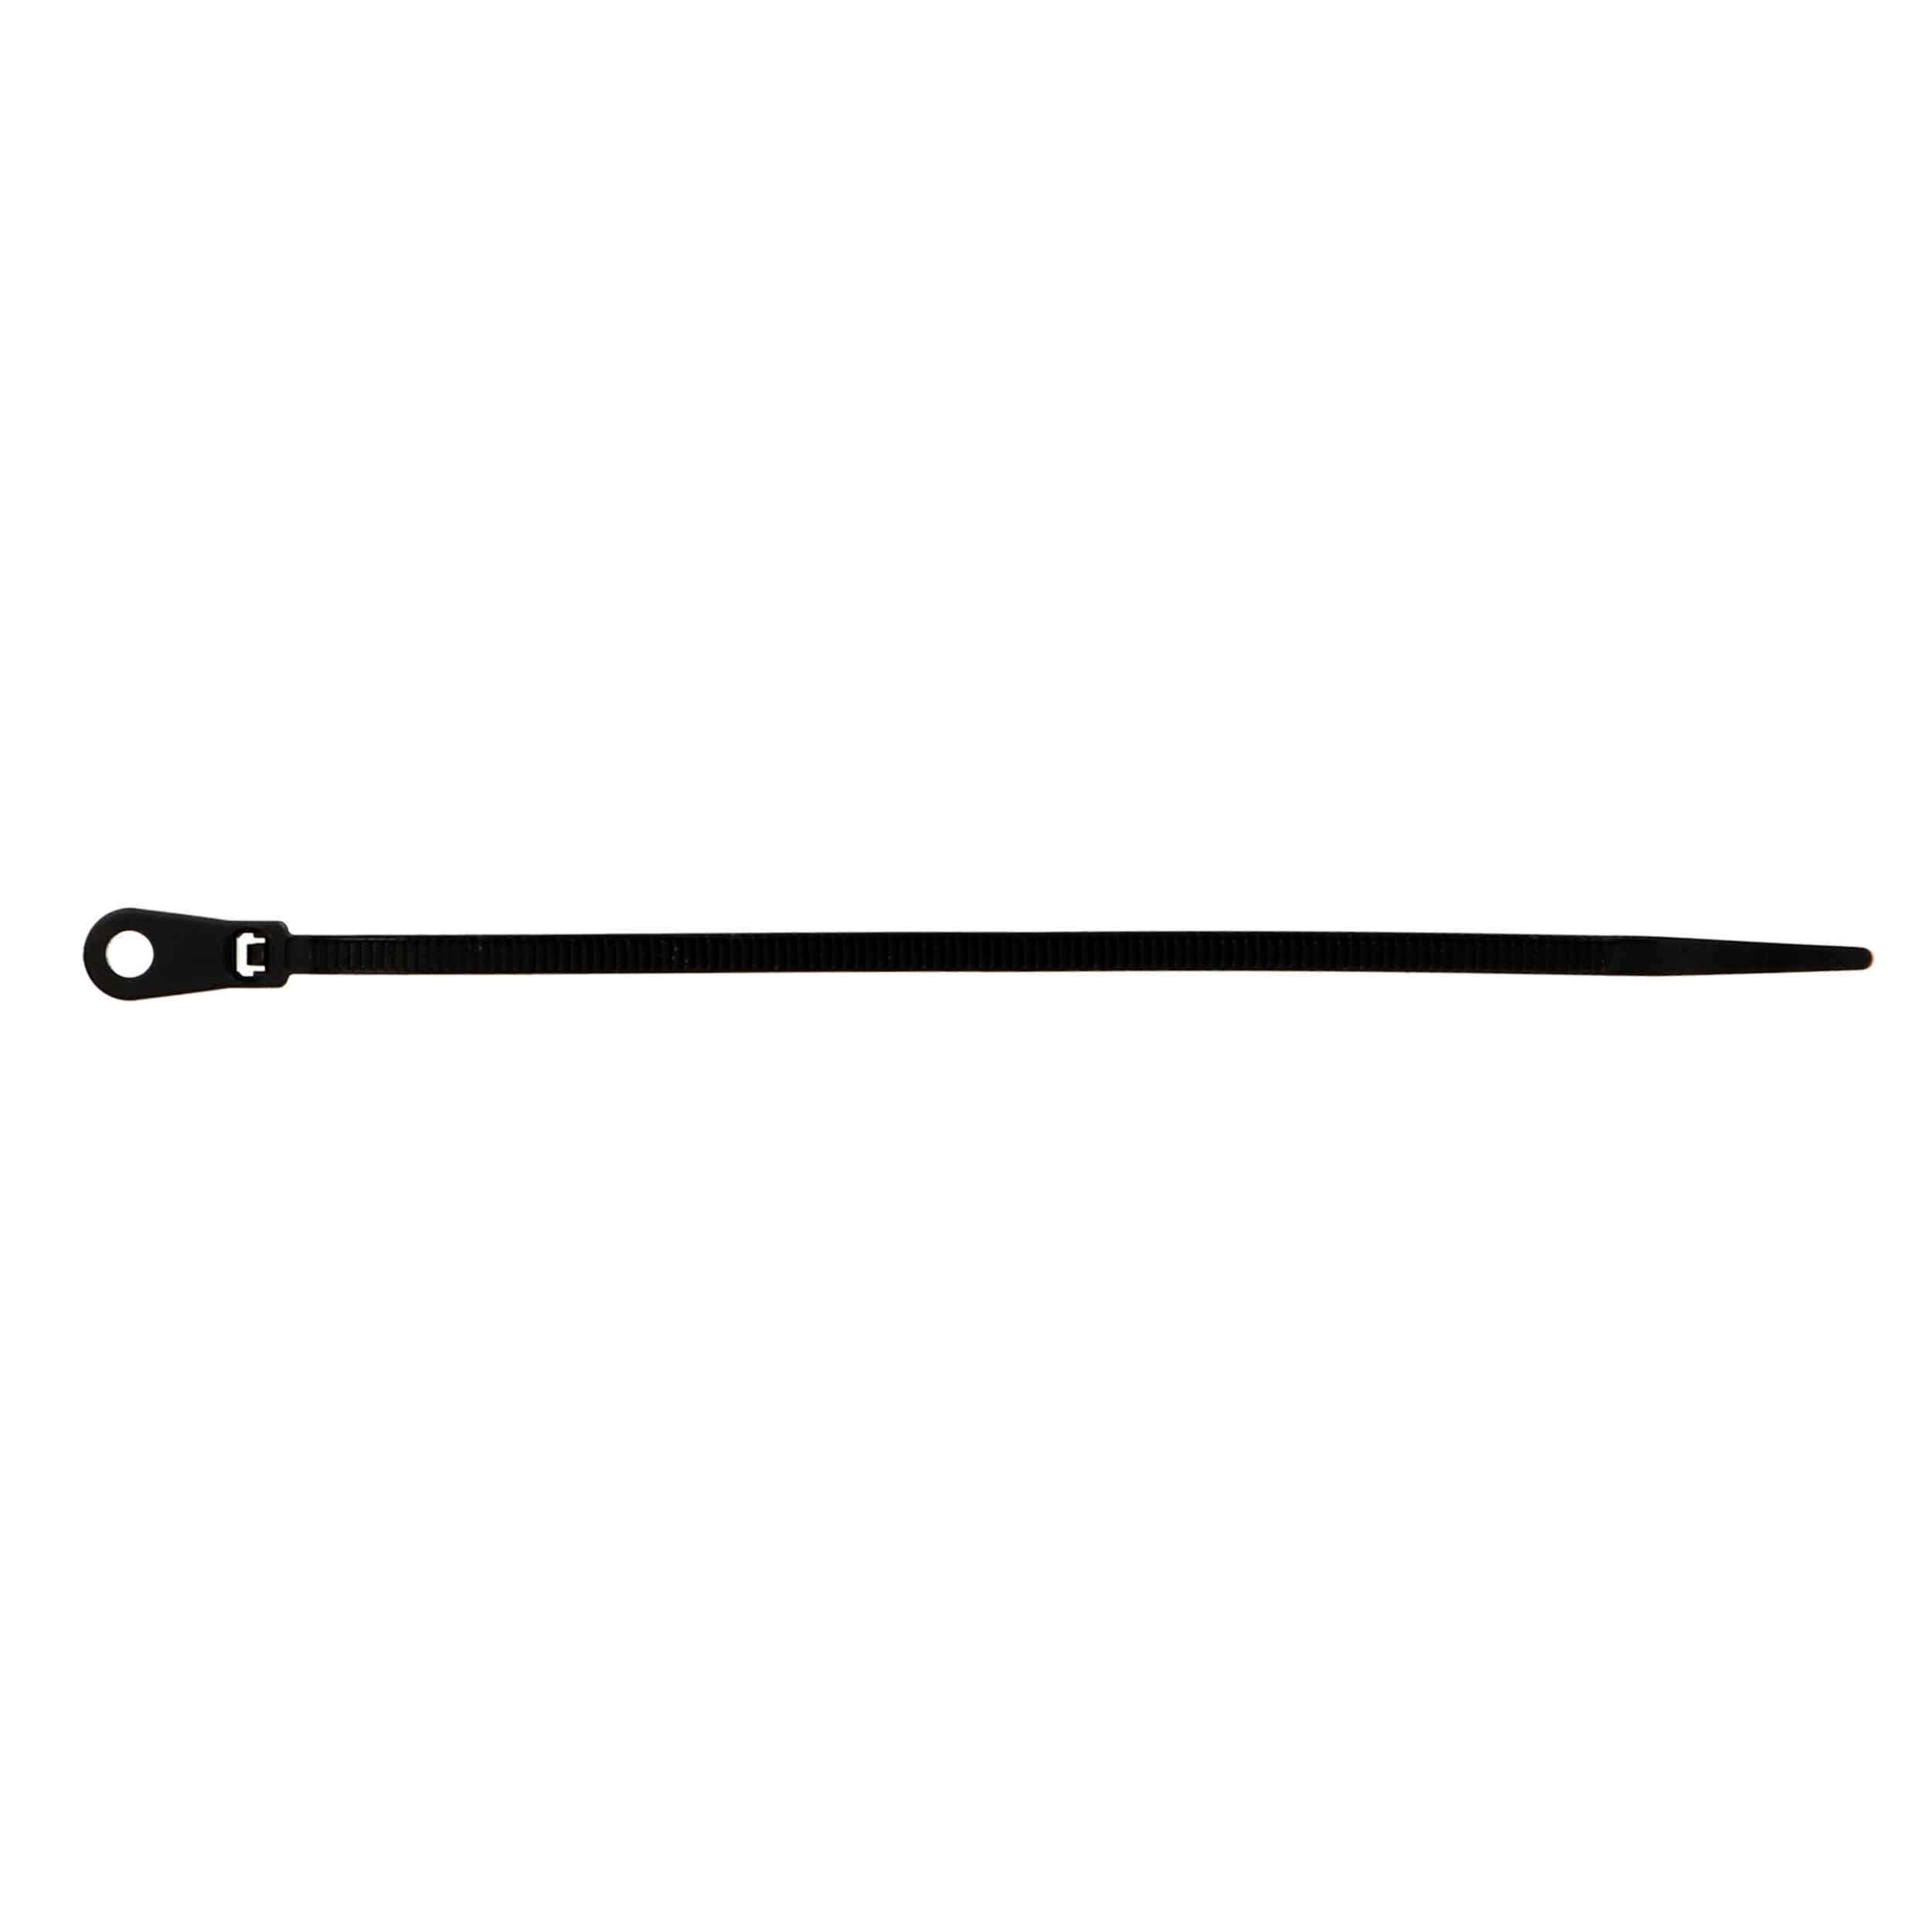 Mounting Hole Cable Tie -  6 inch 40 lb - Package of 100